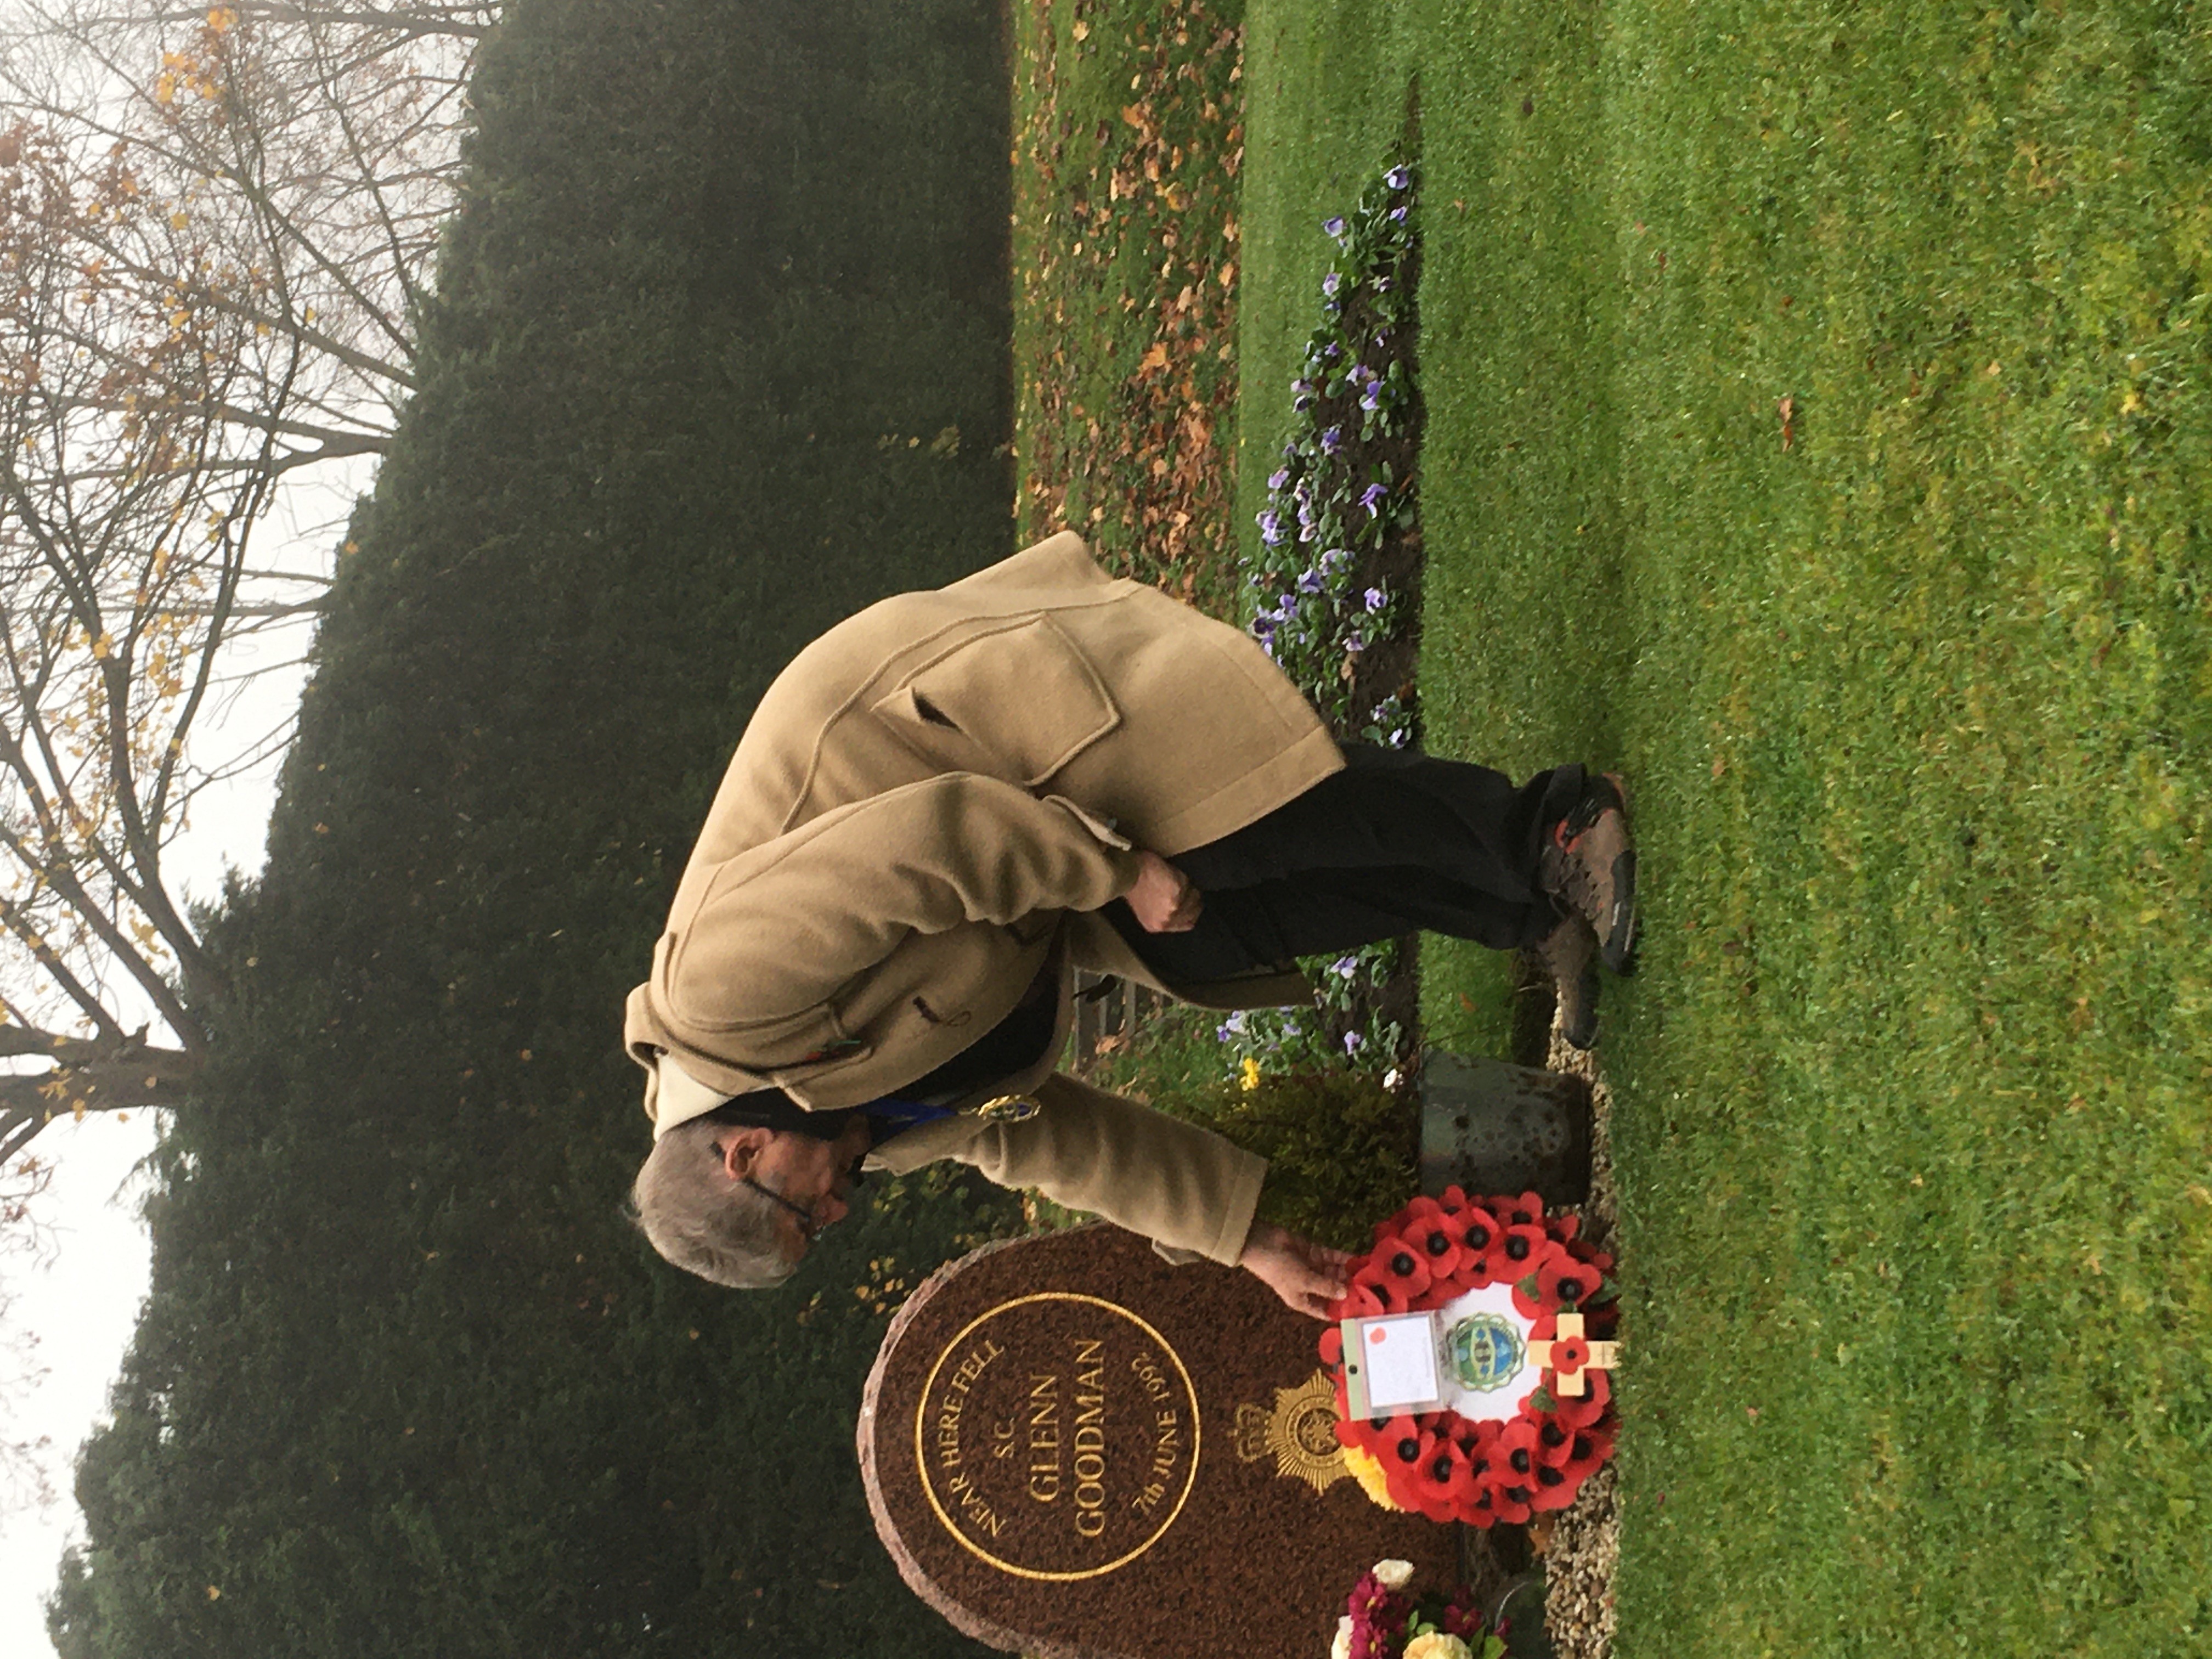 Mayor Laying Wreath at Grave Site